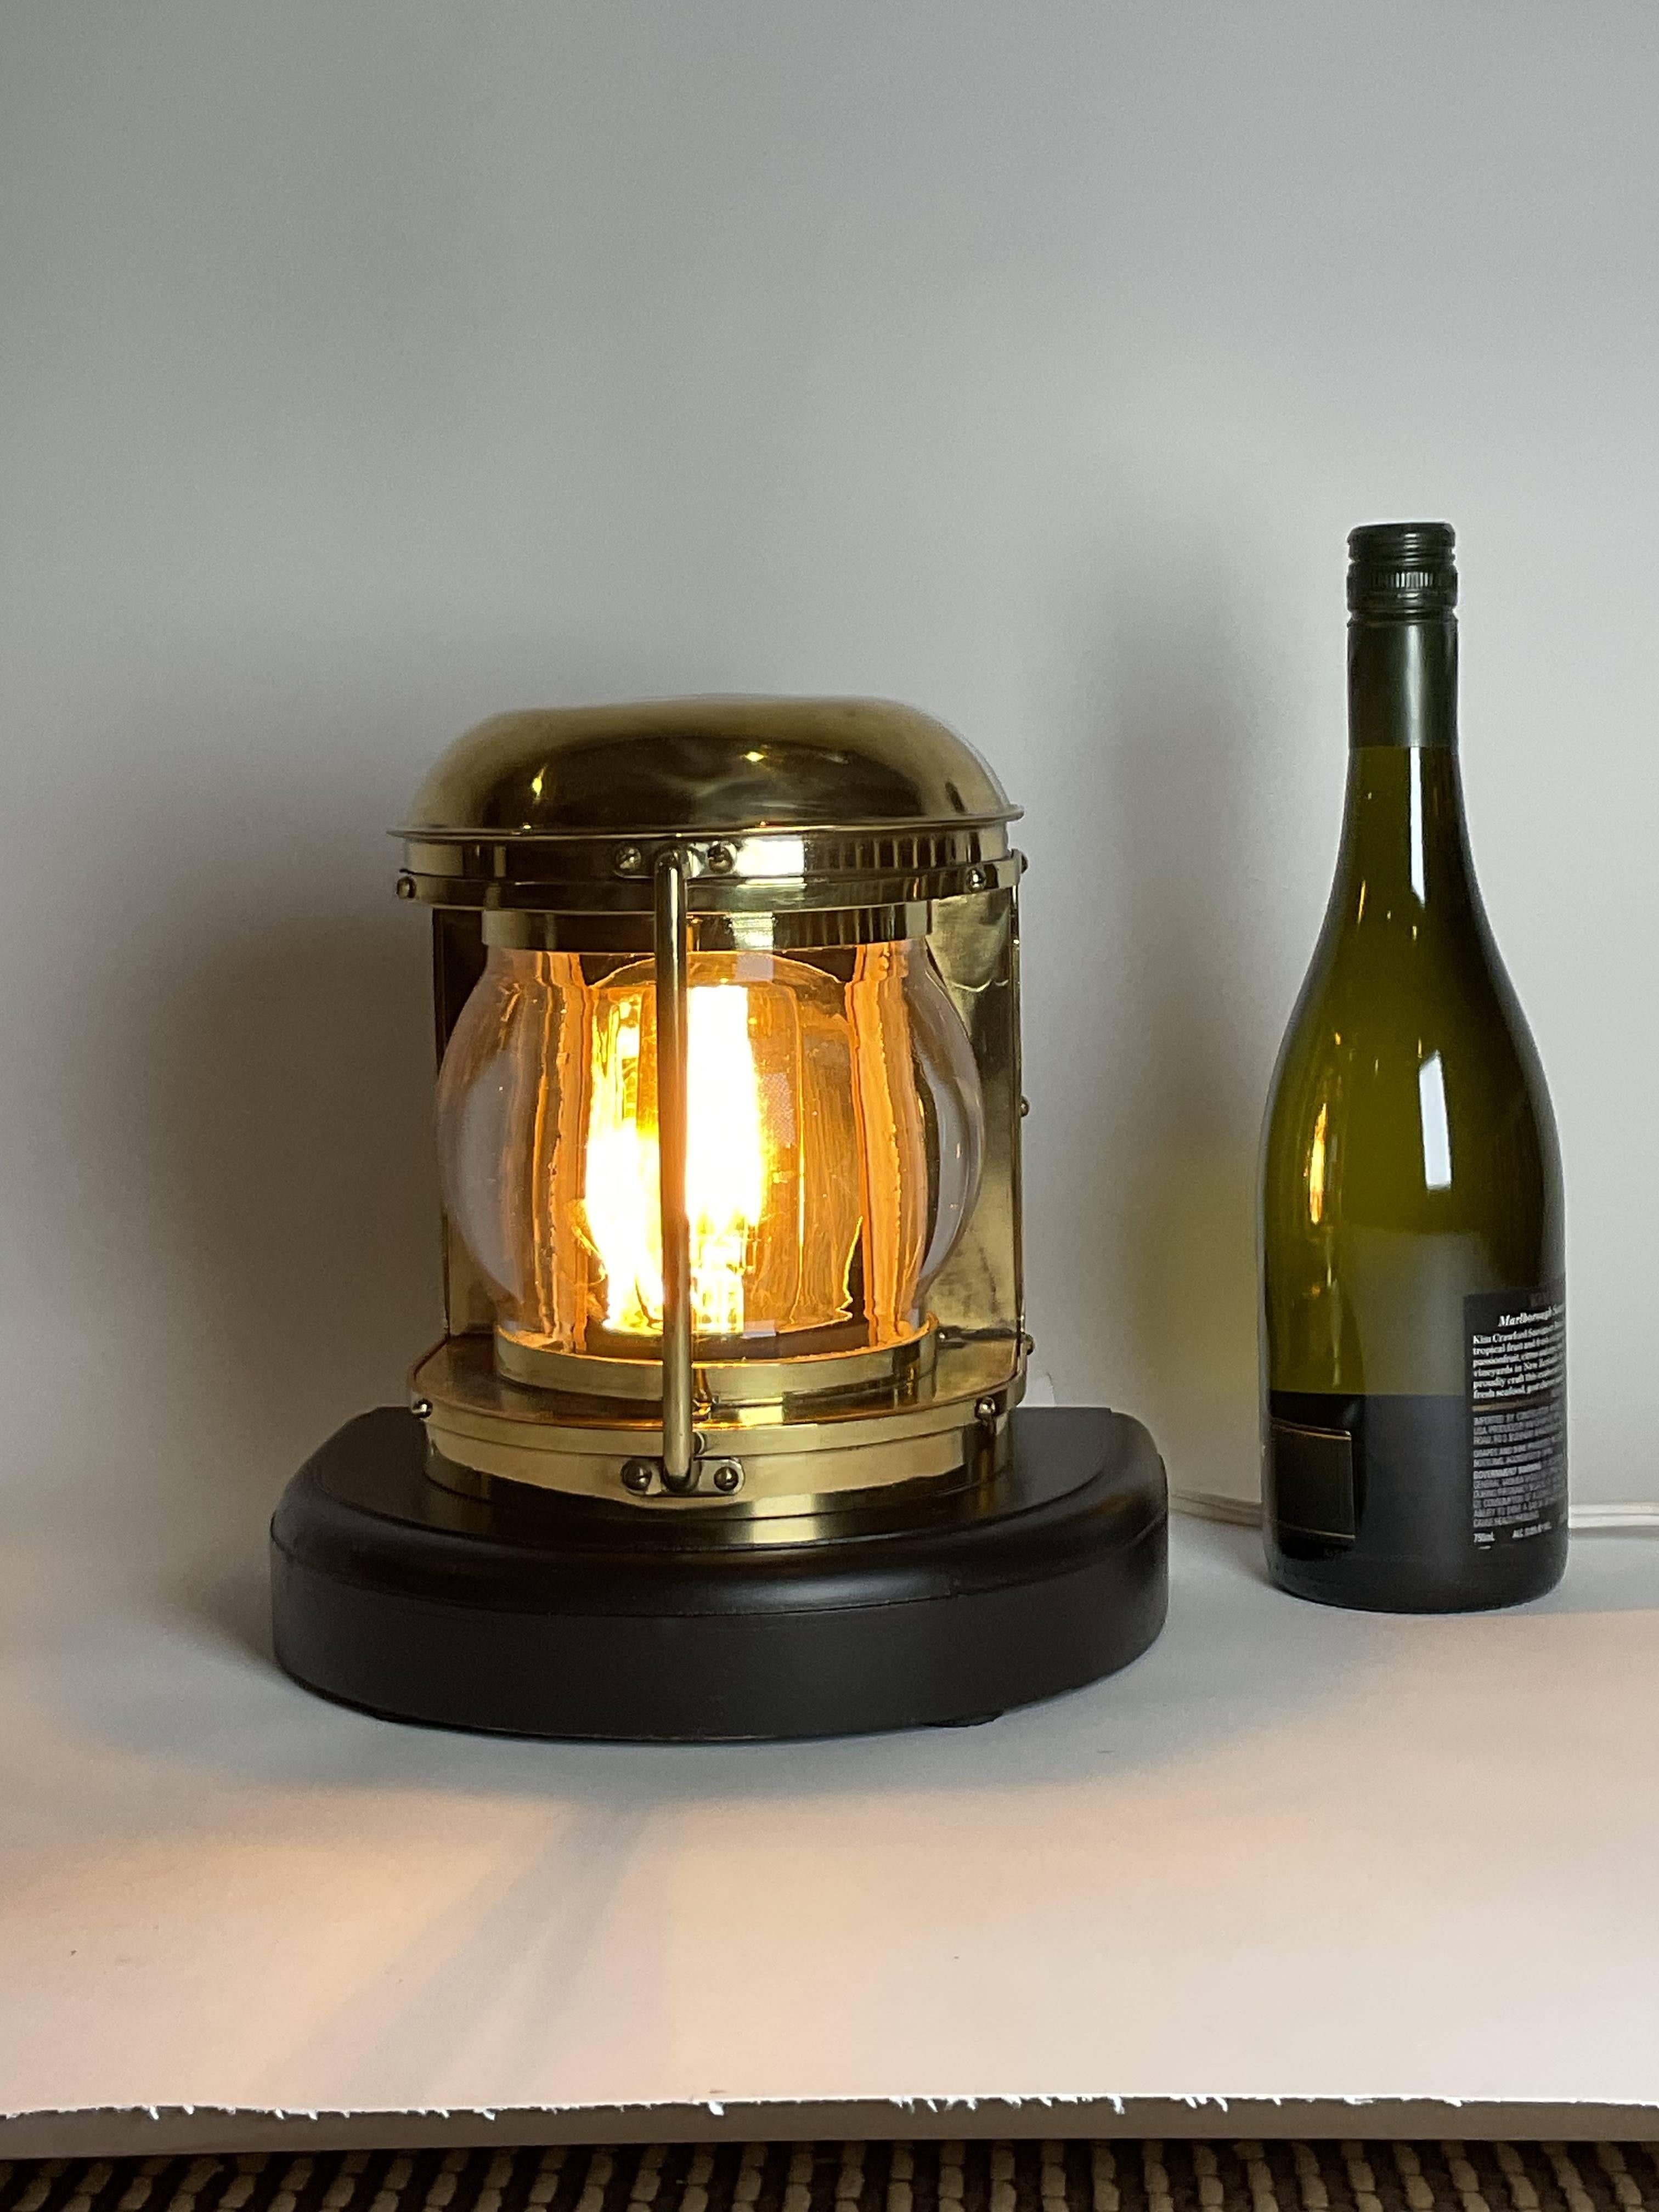 Highly polished boat lantern with thick bulbous glass lens. This has been meticulously polished and lacquered. Mounted to a thick wood base with  dark rich finish. Wired with a vintage bulb. by Japanese maker. Exceptional item. Circa 1960.

Weight: